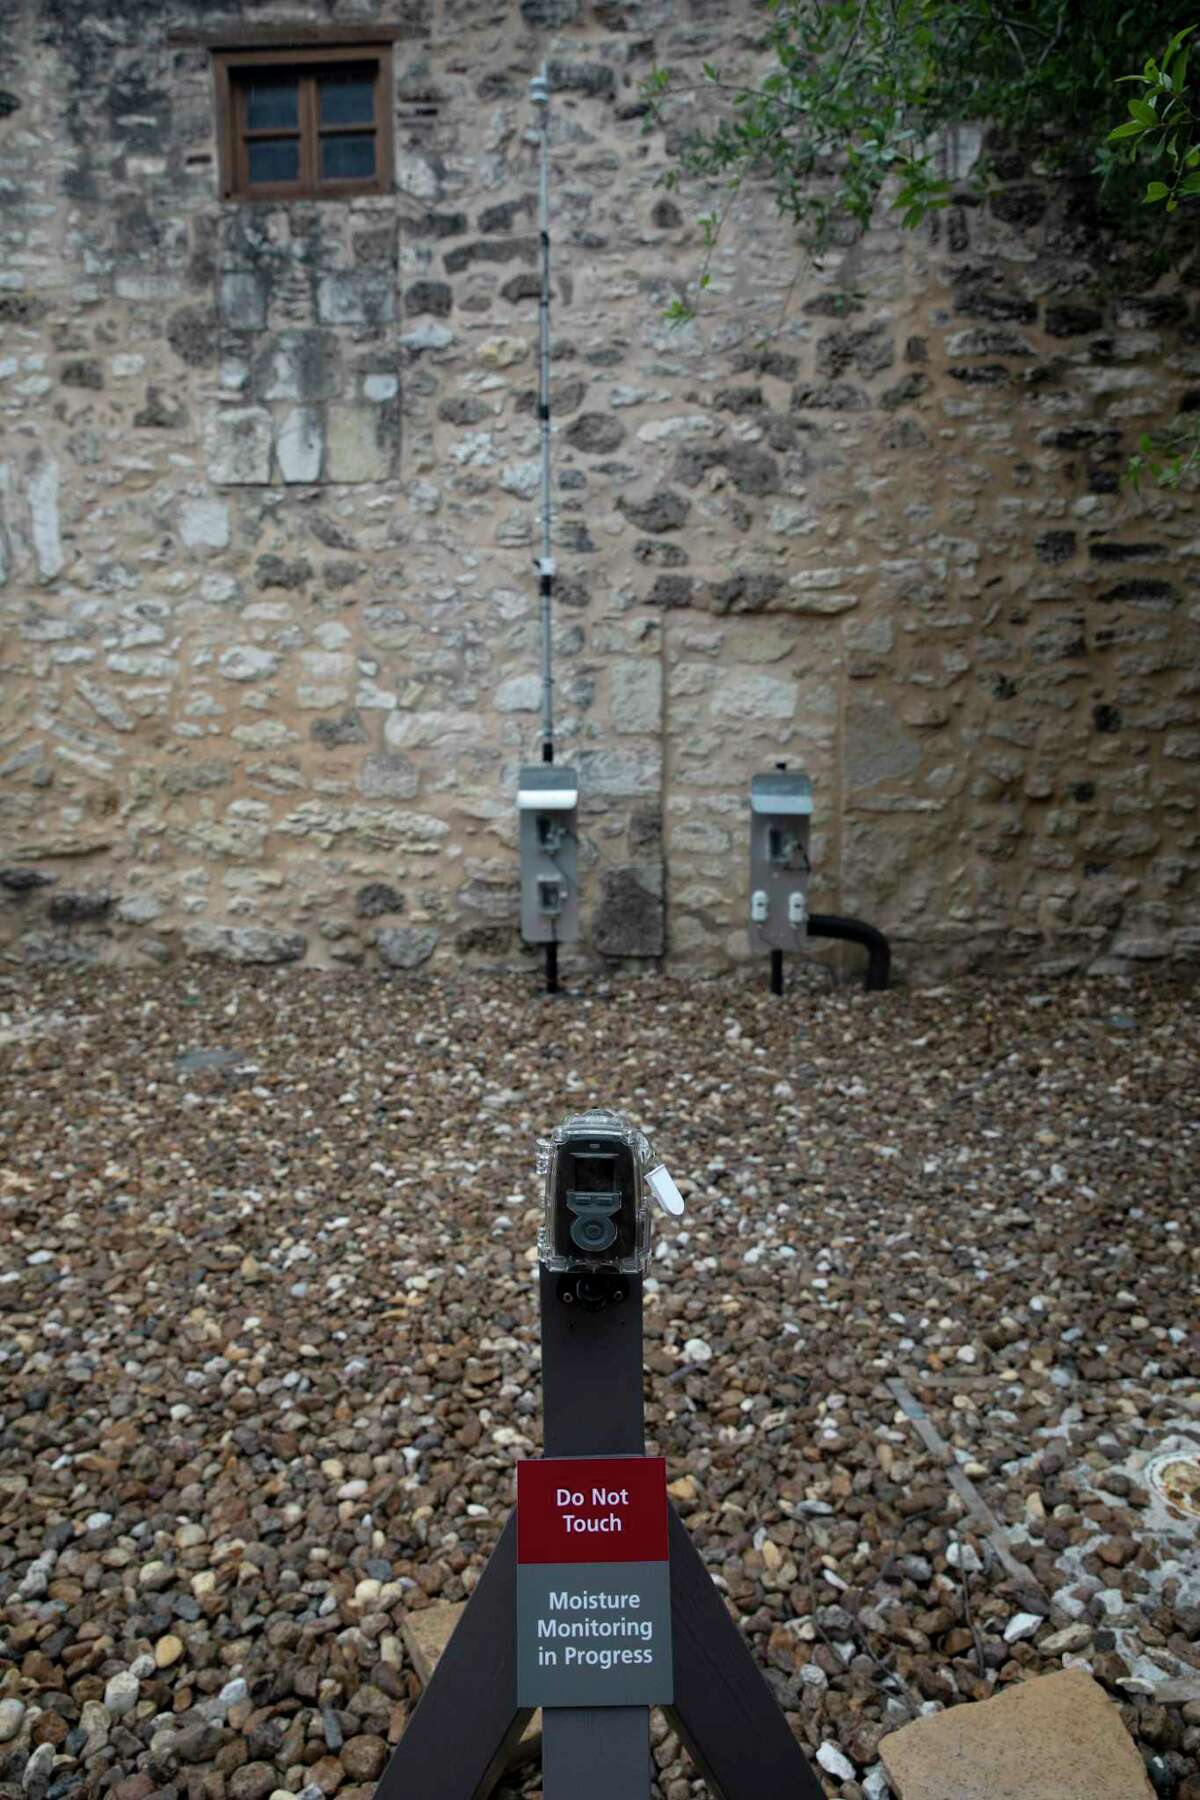 A waterproof, time-lapse camera is set up outside the Alamo Church to record the speed rainfall and other moisture from a wall channels, pools and eventually dries. The camera, along with moisture-monitoring units, will be in place for a year to study temperatures moisture in the limestone walls and how best to proceed with preservation and conservation techniques.